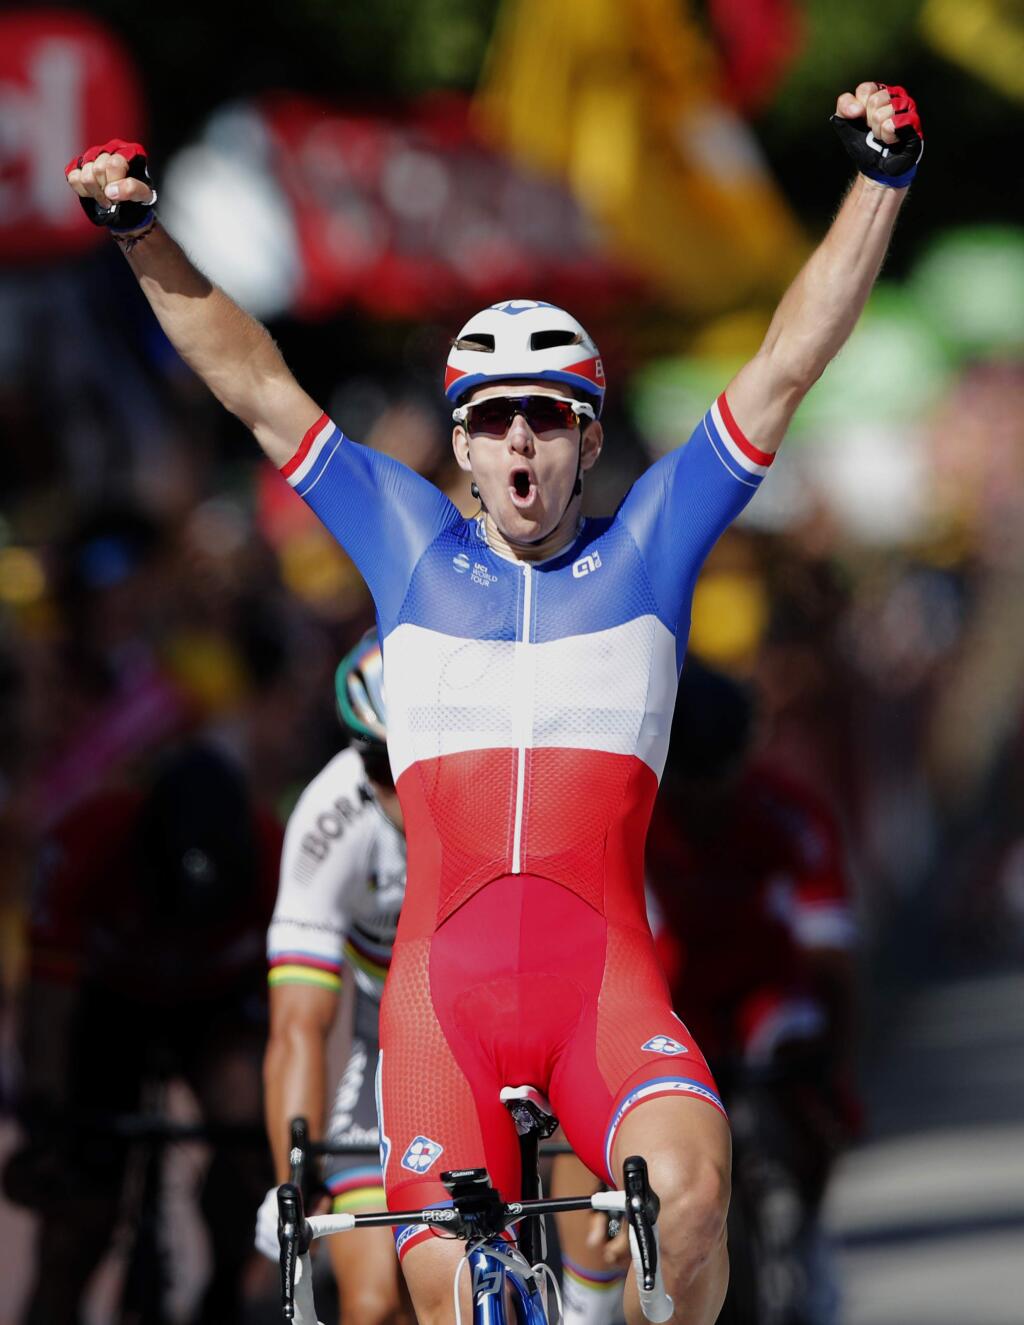 France's Arnaud Demare crosses the finish line to win the fourth stage of the Tour de France cycling race over 207.5 kilometers (129 miles) with start in Mondorf-les-Bains, Luxembourg, and finish in Vittel, France, , Tuesday, July 4, 2017. (AP Photo/Christophe Ena)